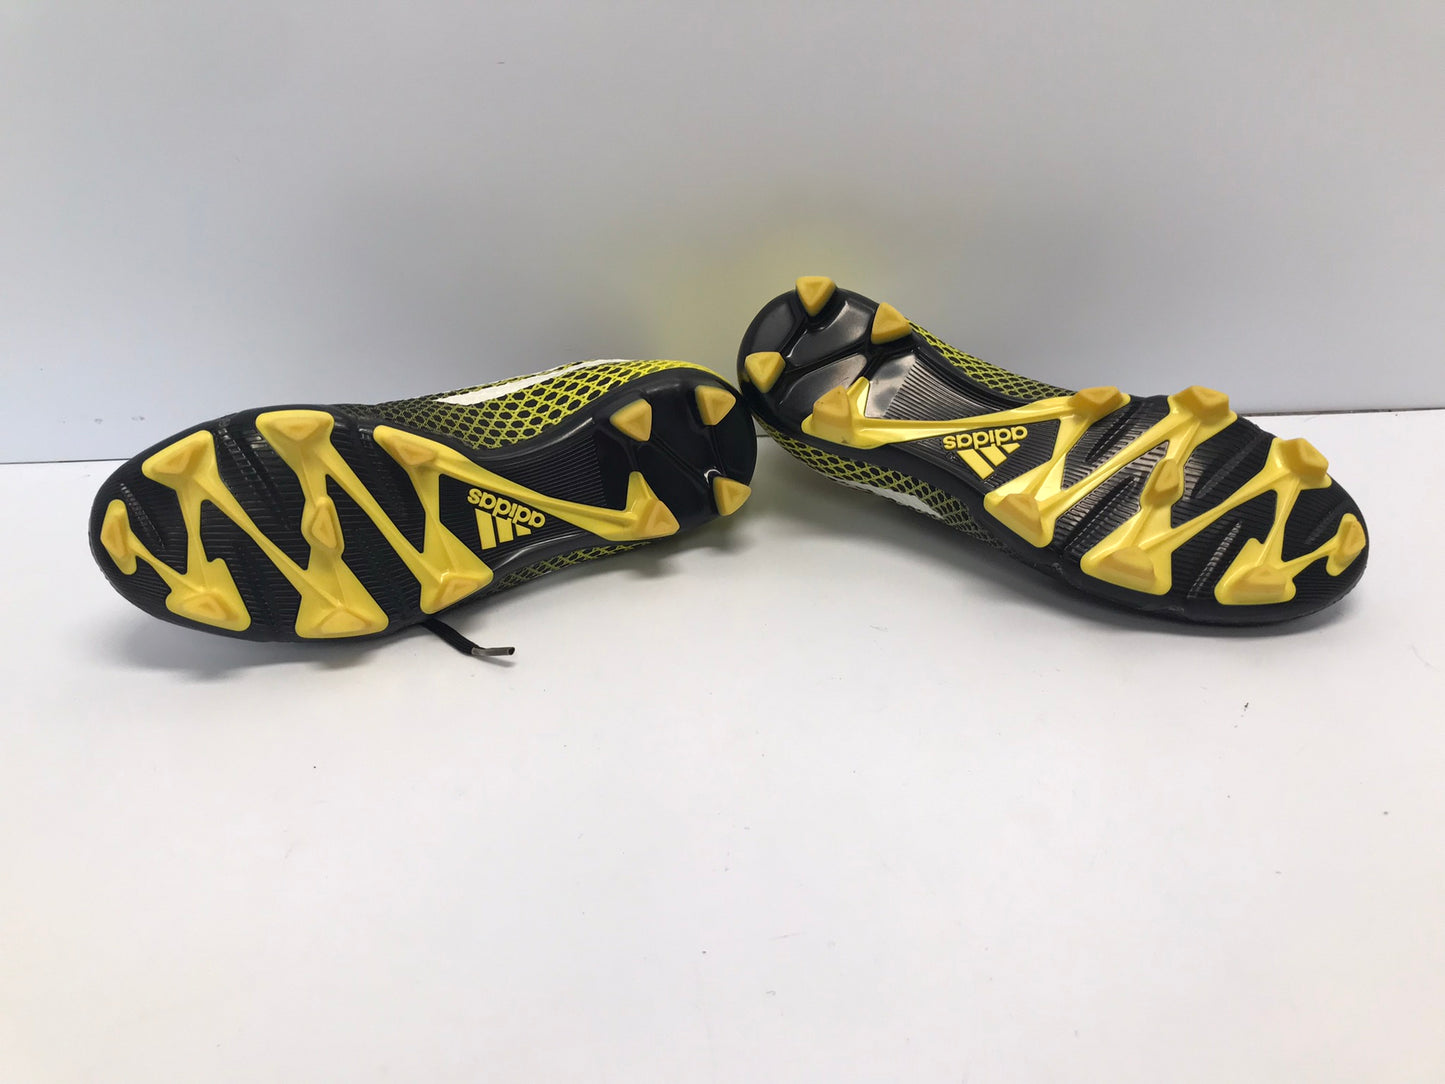 Soccer Shoes Cleats Cleats Men's Size 6.5 Adidas Black White Yellow Excellent